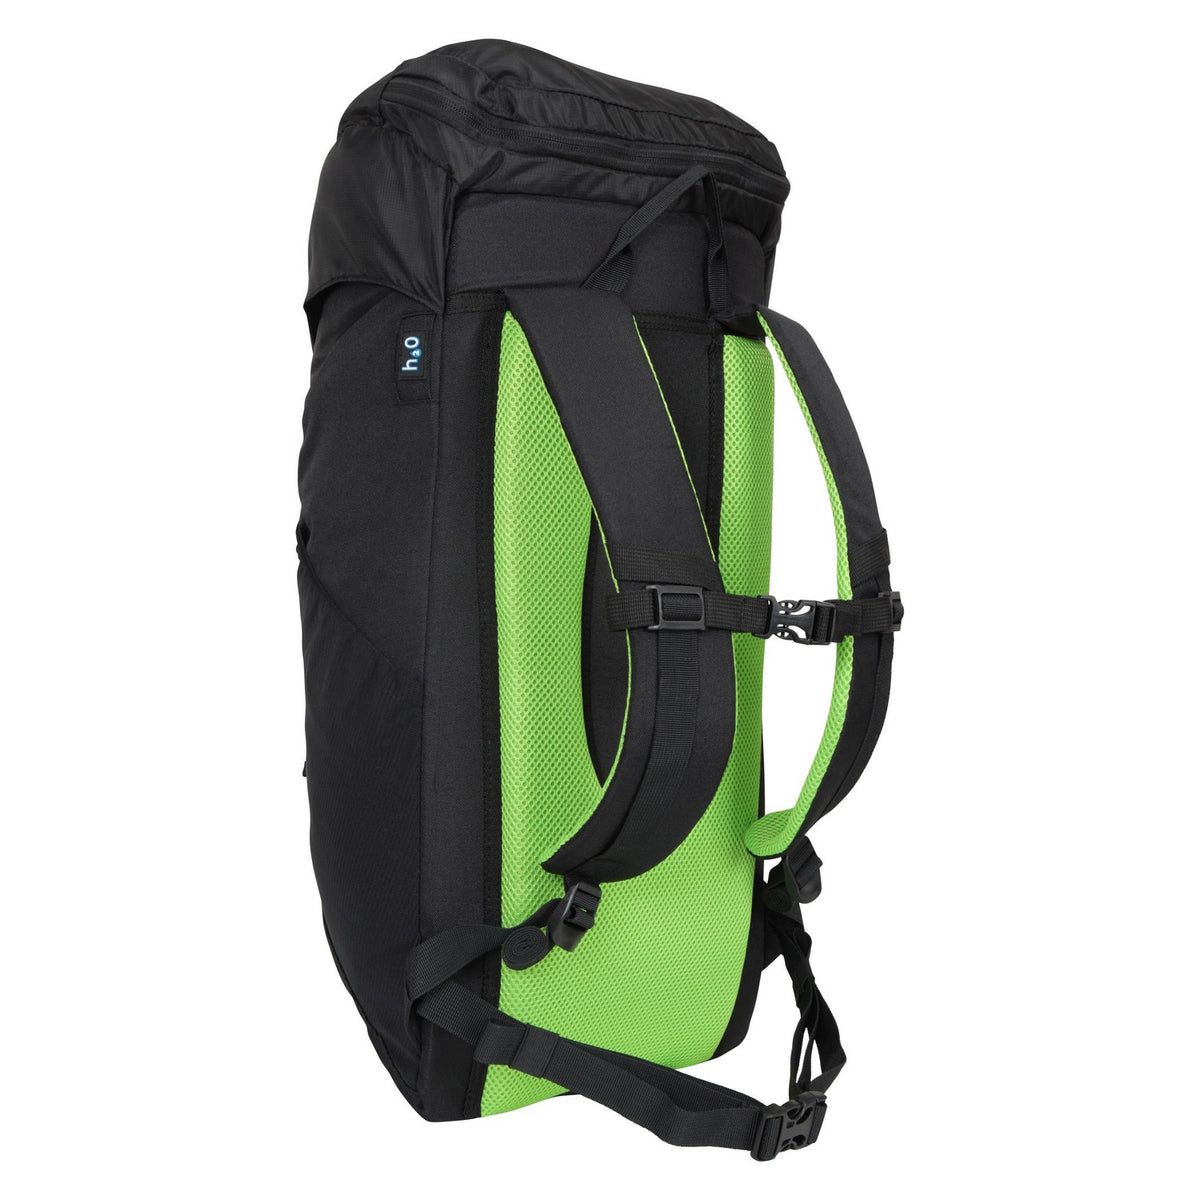 Mountain Warehouse Ridge 35L Backpack | Discounts on great Brands